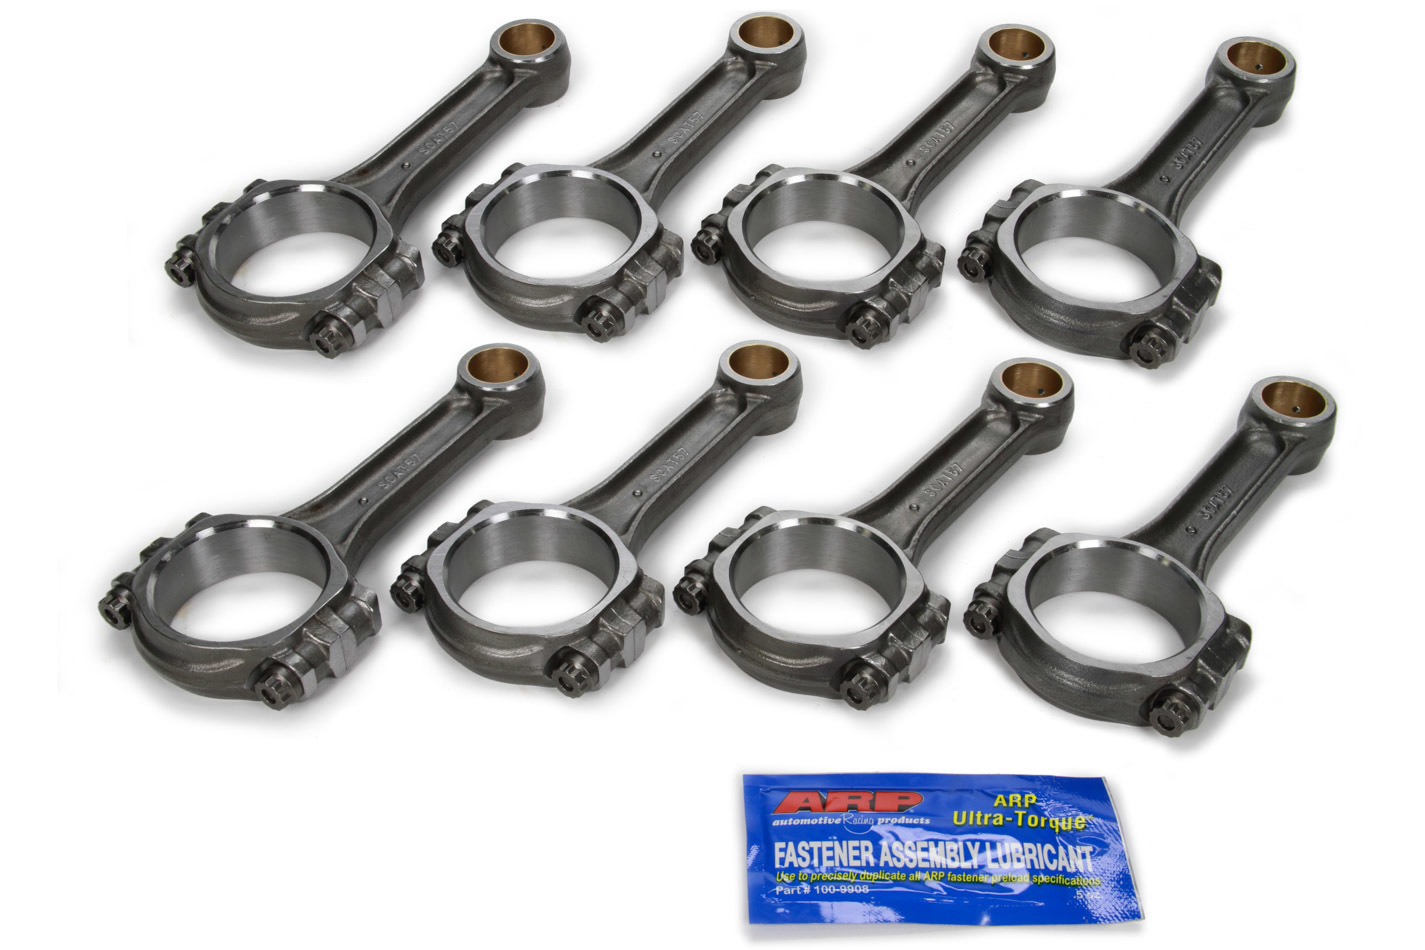 Scat 2-ICR6000A - Connecting Rod, Pro Stock, I Beam, 6.000 in Long, Bushed, 3/8 in Cap Screws, Forged Steel, Small Block Chevy, Set of 8